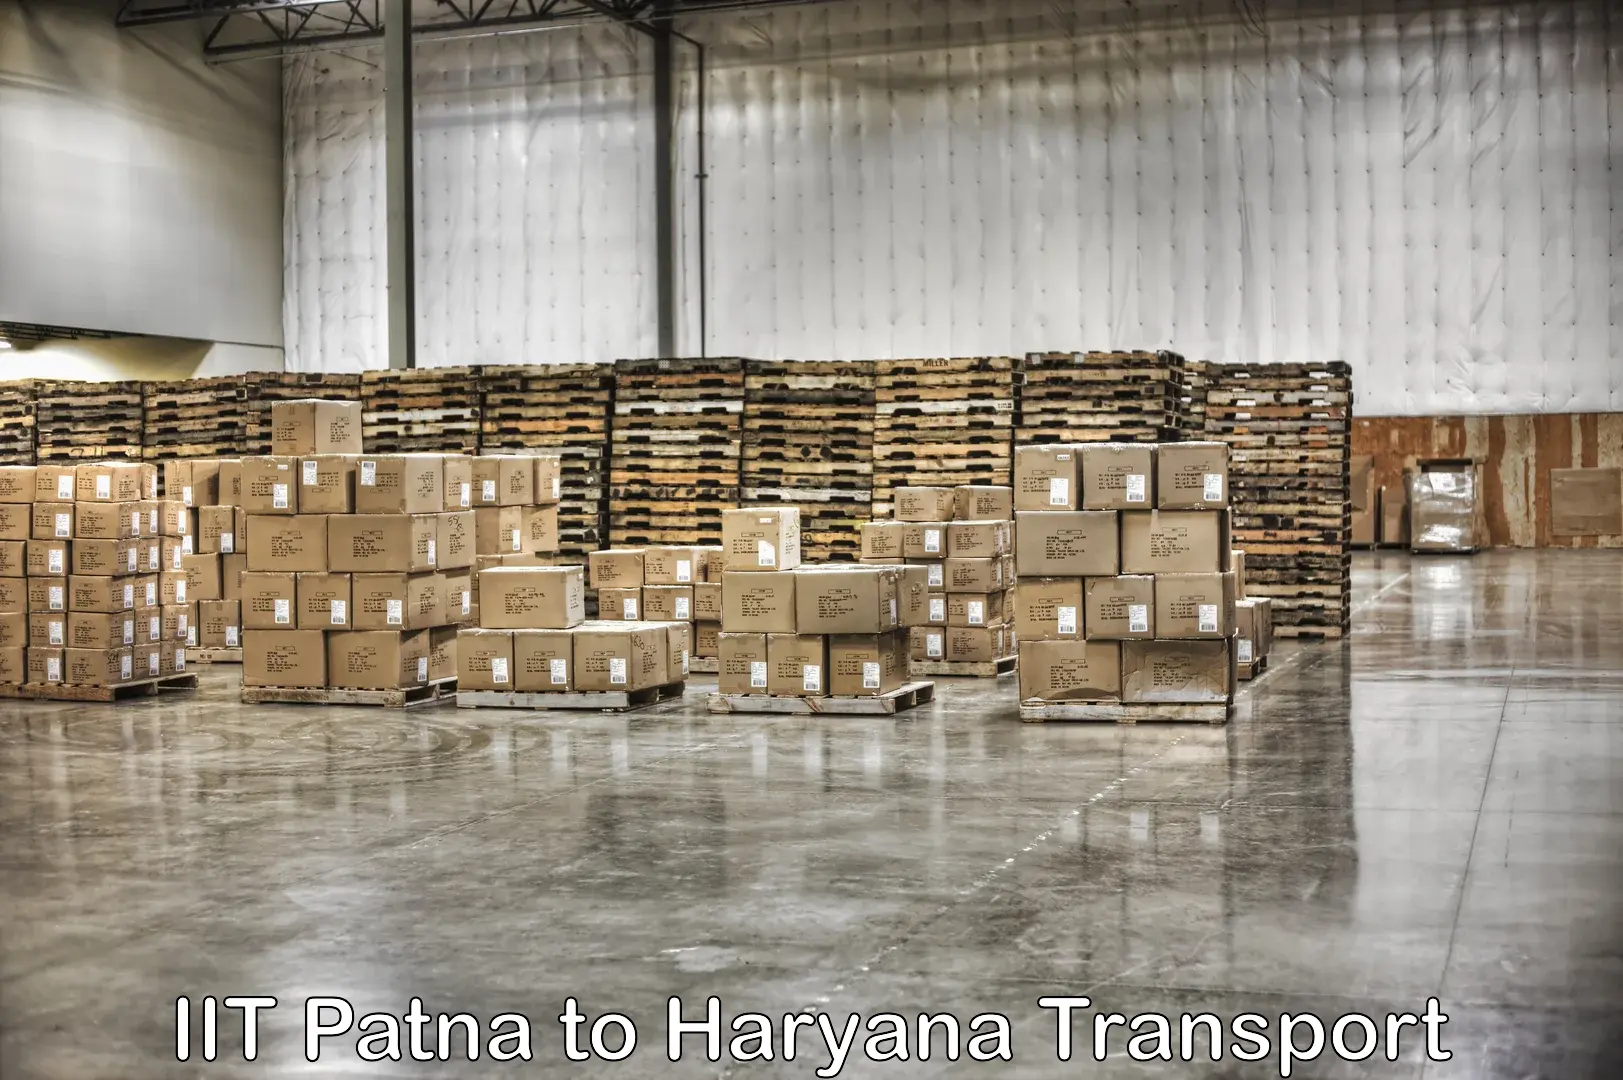 Commercial transport service IIT Patna to Faridabad